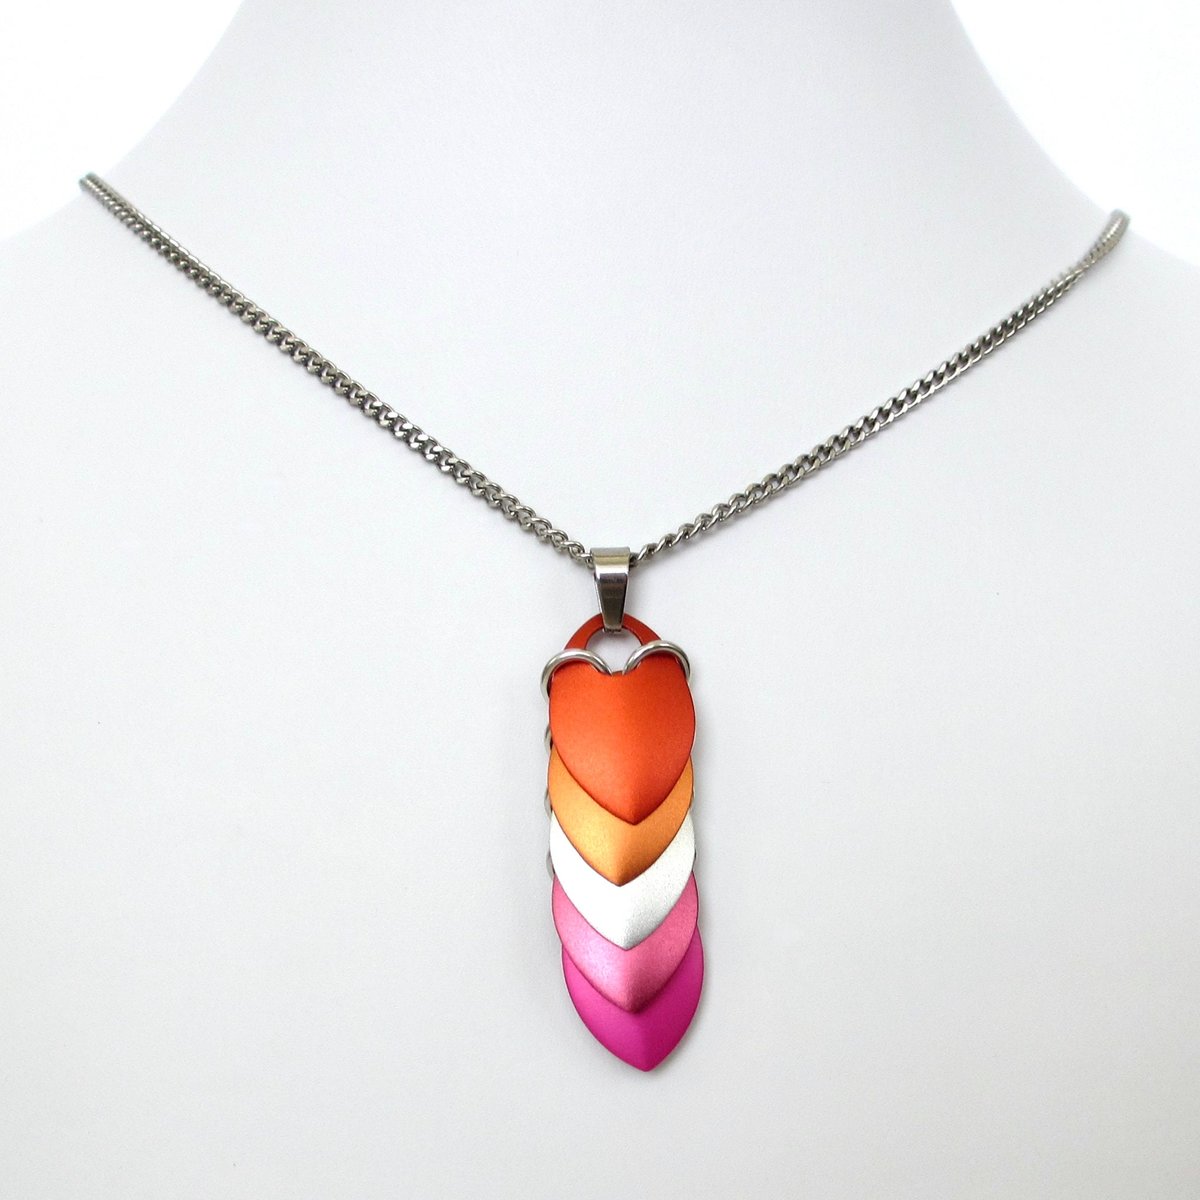 Lesbian pride pendant, 5 color sunset flag chainmail scales necklace, LGBTQ scalemail jewelry